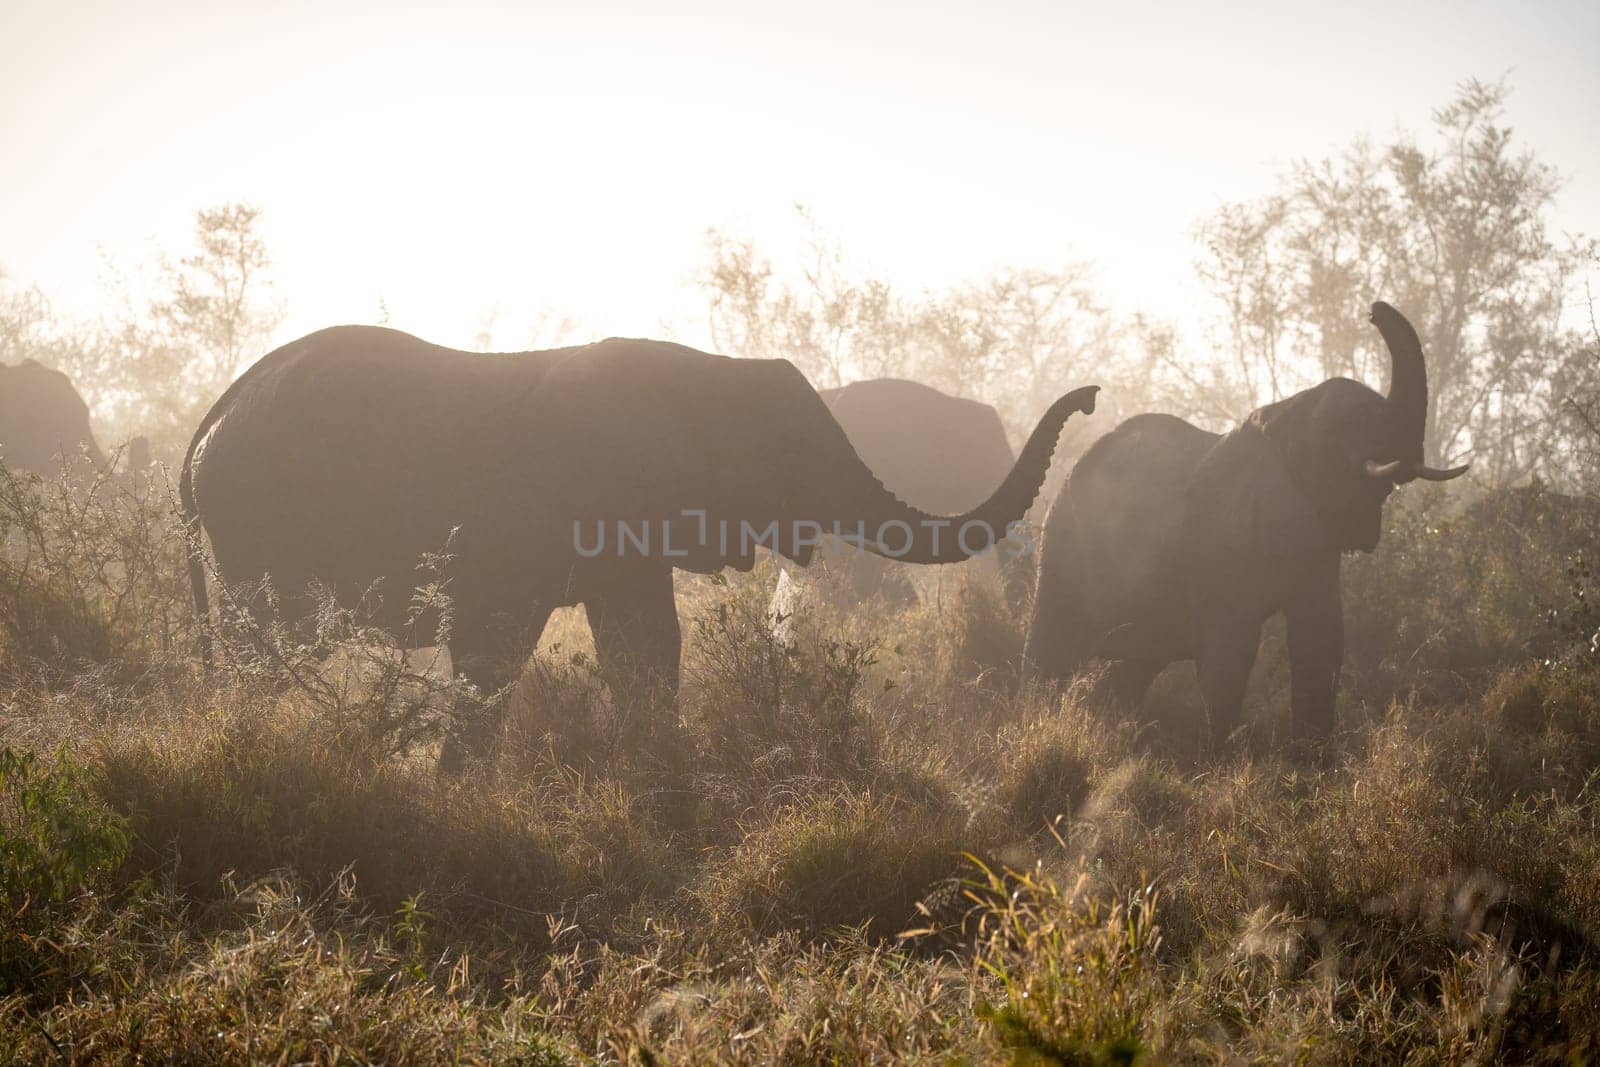 Elephant close ups in Kruger National Park, South Africa. High quality photo